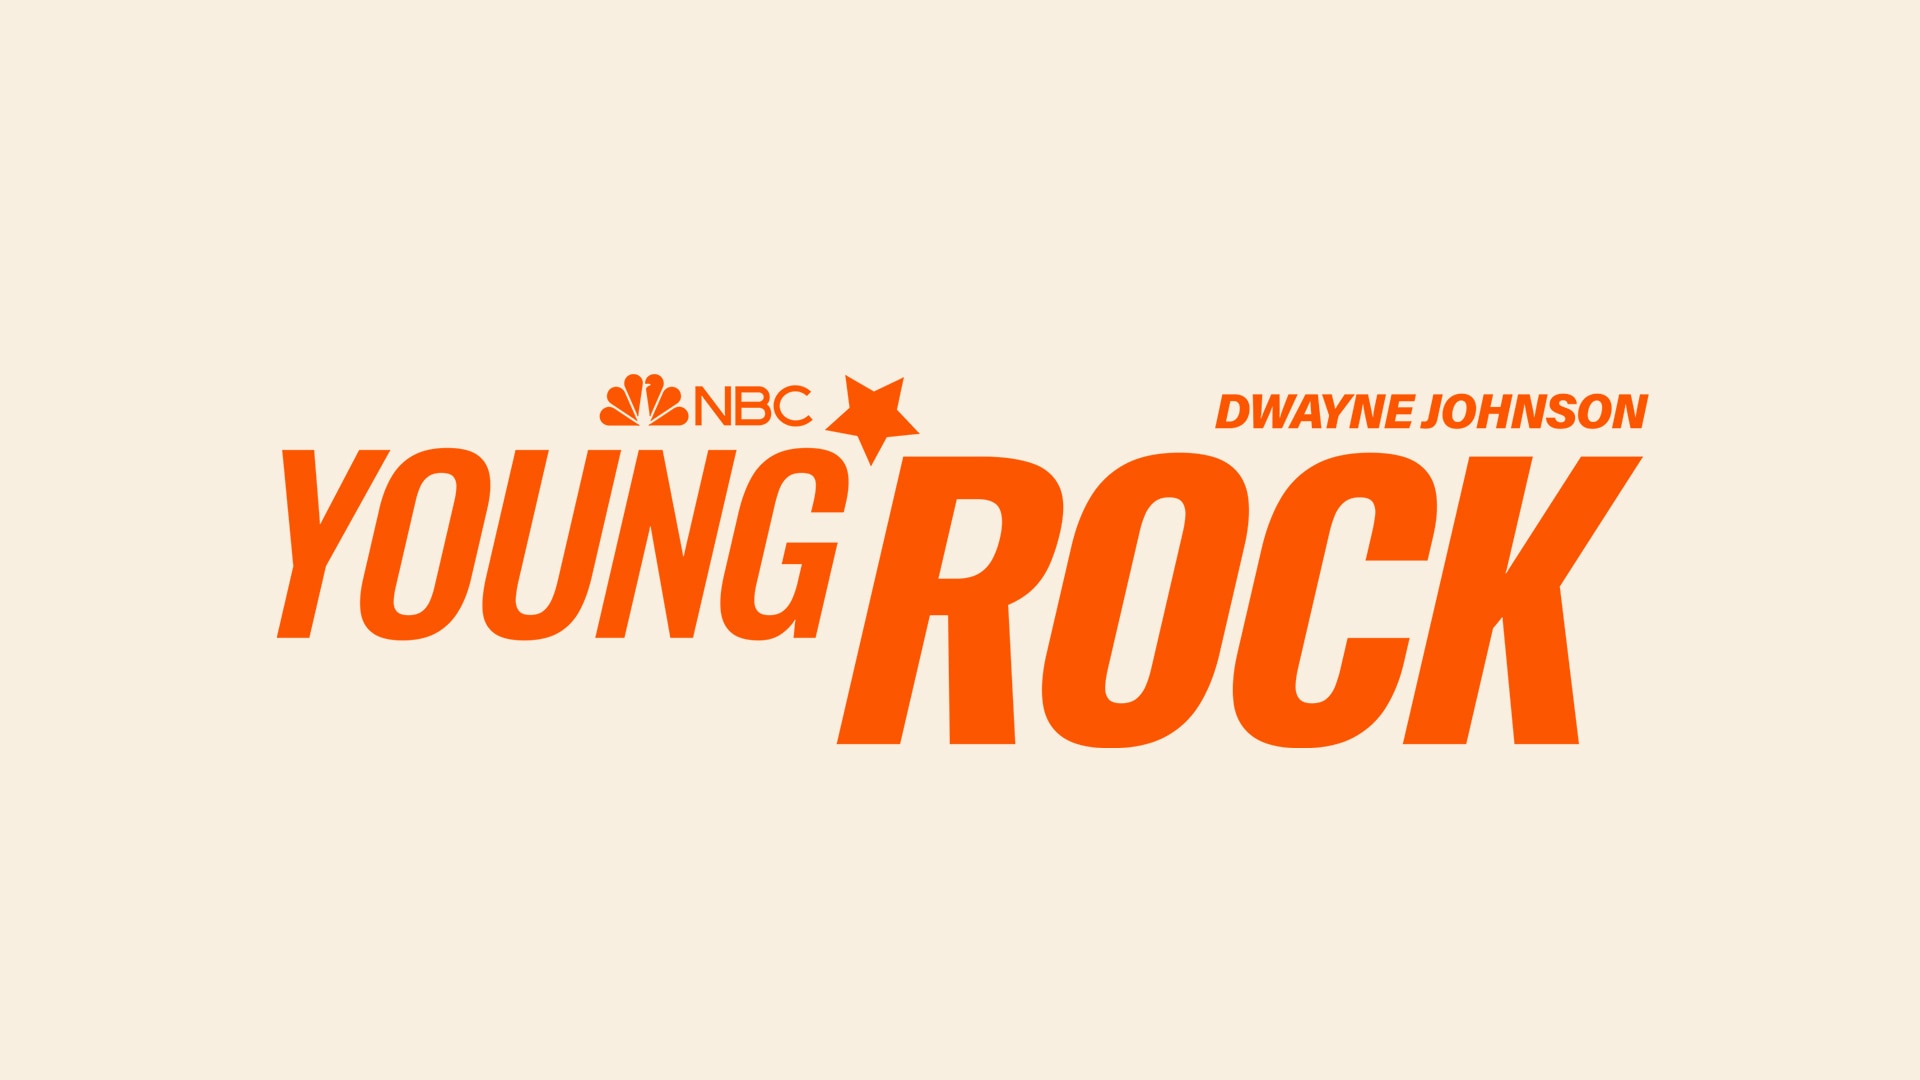 NBC cancels 'Young Rock' after 3 seasons